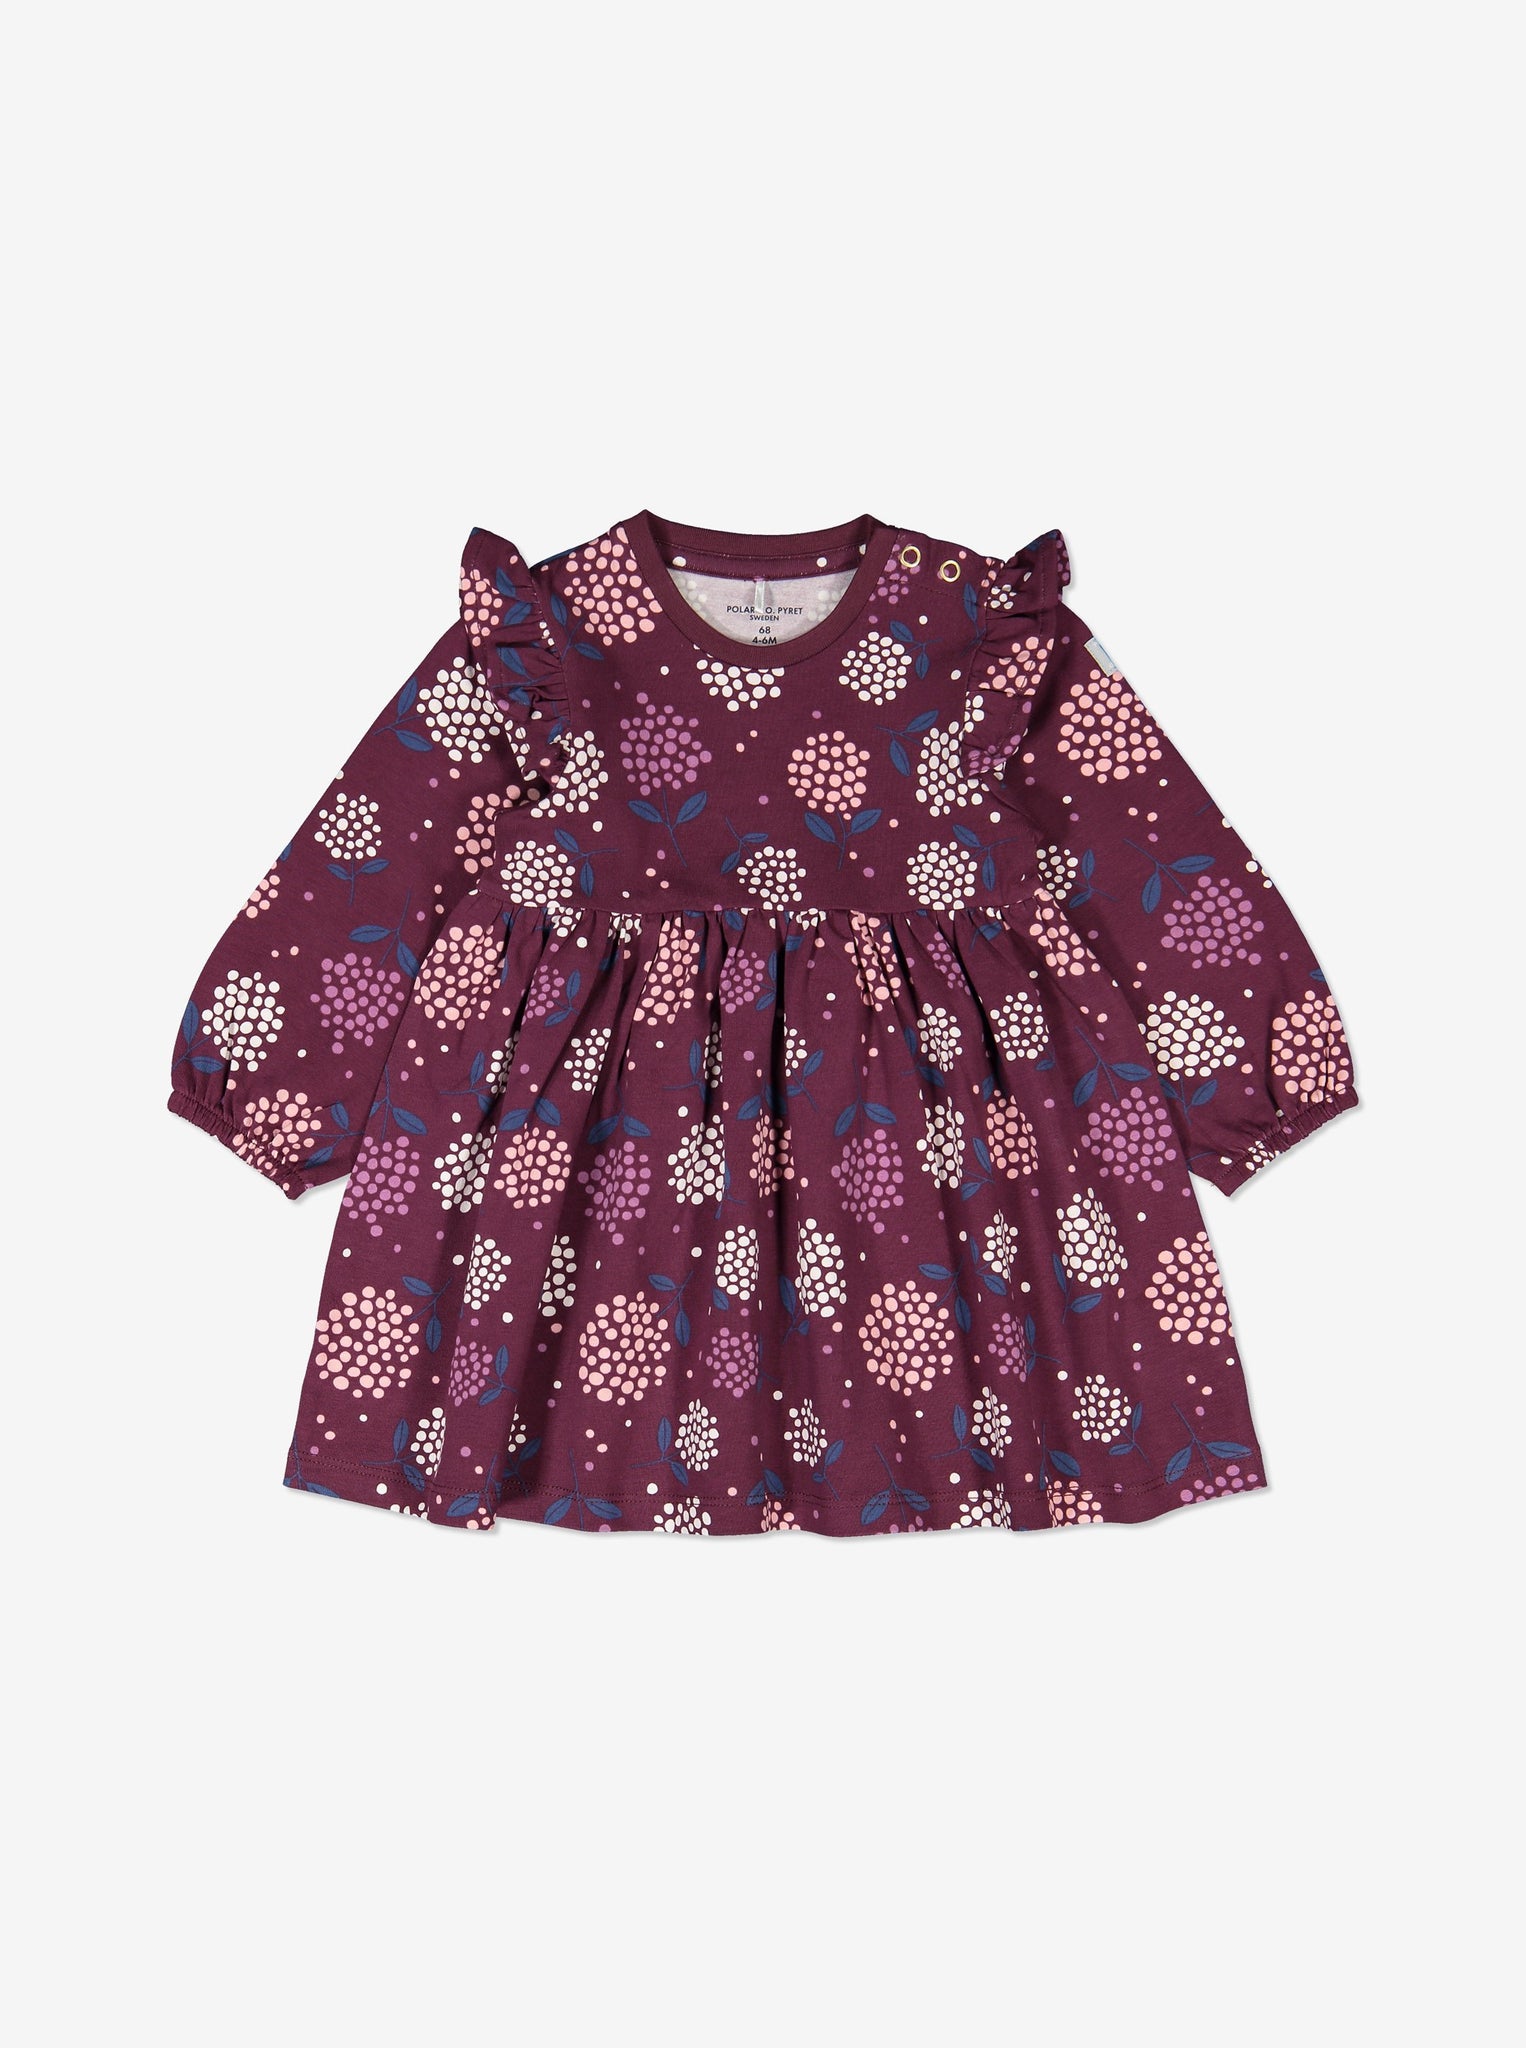 A purple floral long sleeve baby dress, designed with shoulder ruffles. Made of organic cotton.